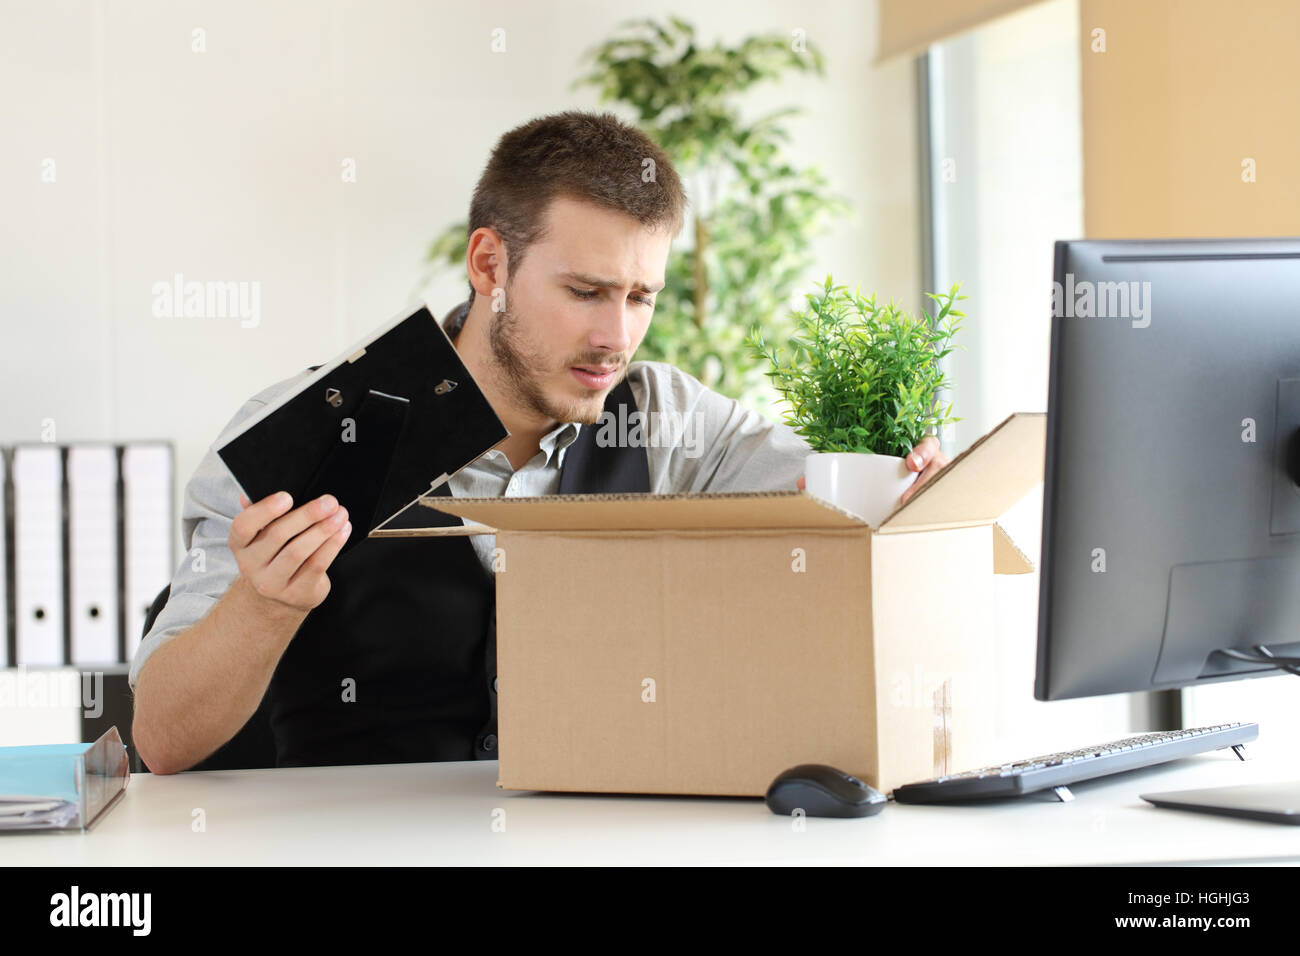 Sad fired businessman putting his belongings in a box from a desktop at office Stock Photo